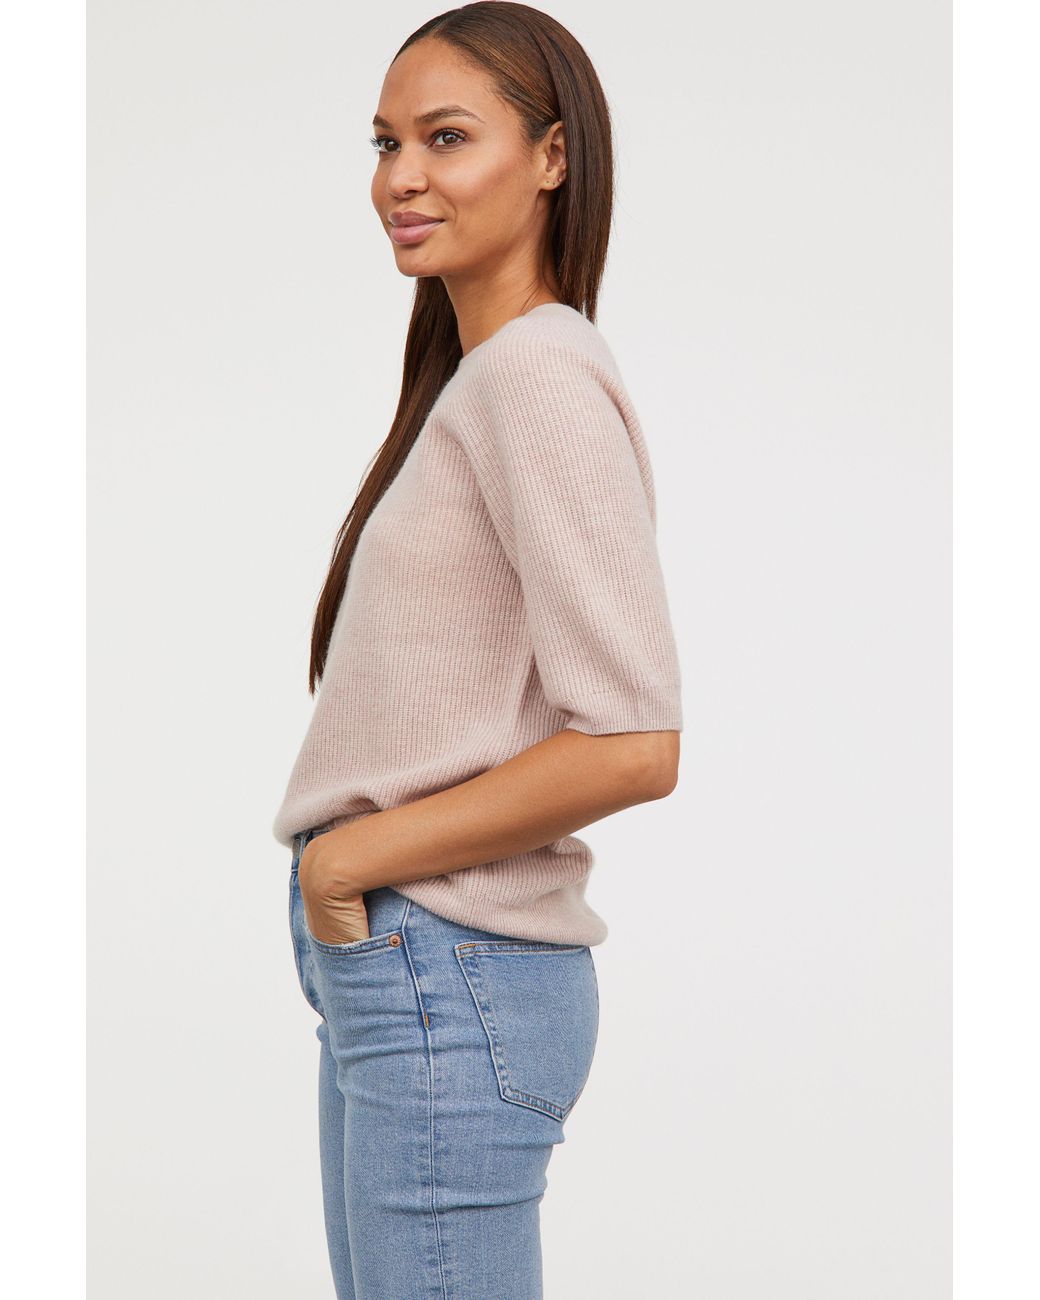 H&M Short-sleeved Cashmere Jumper in Pink | Lyst Canada